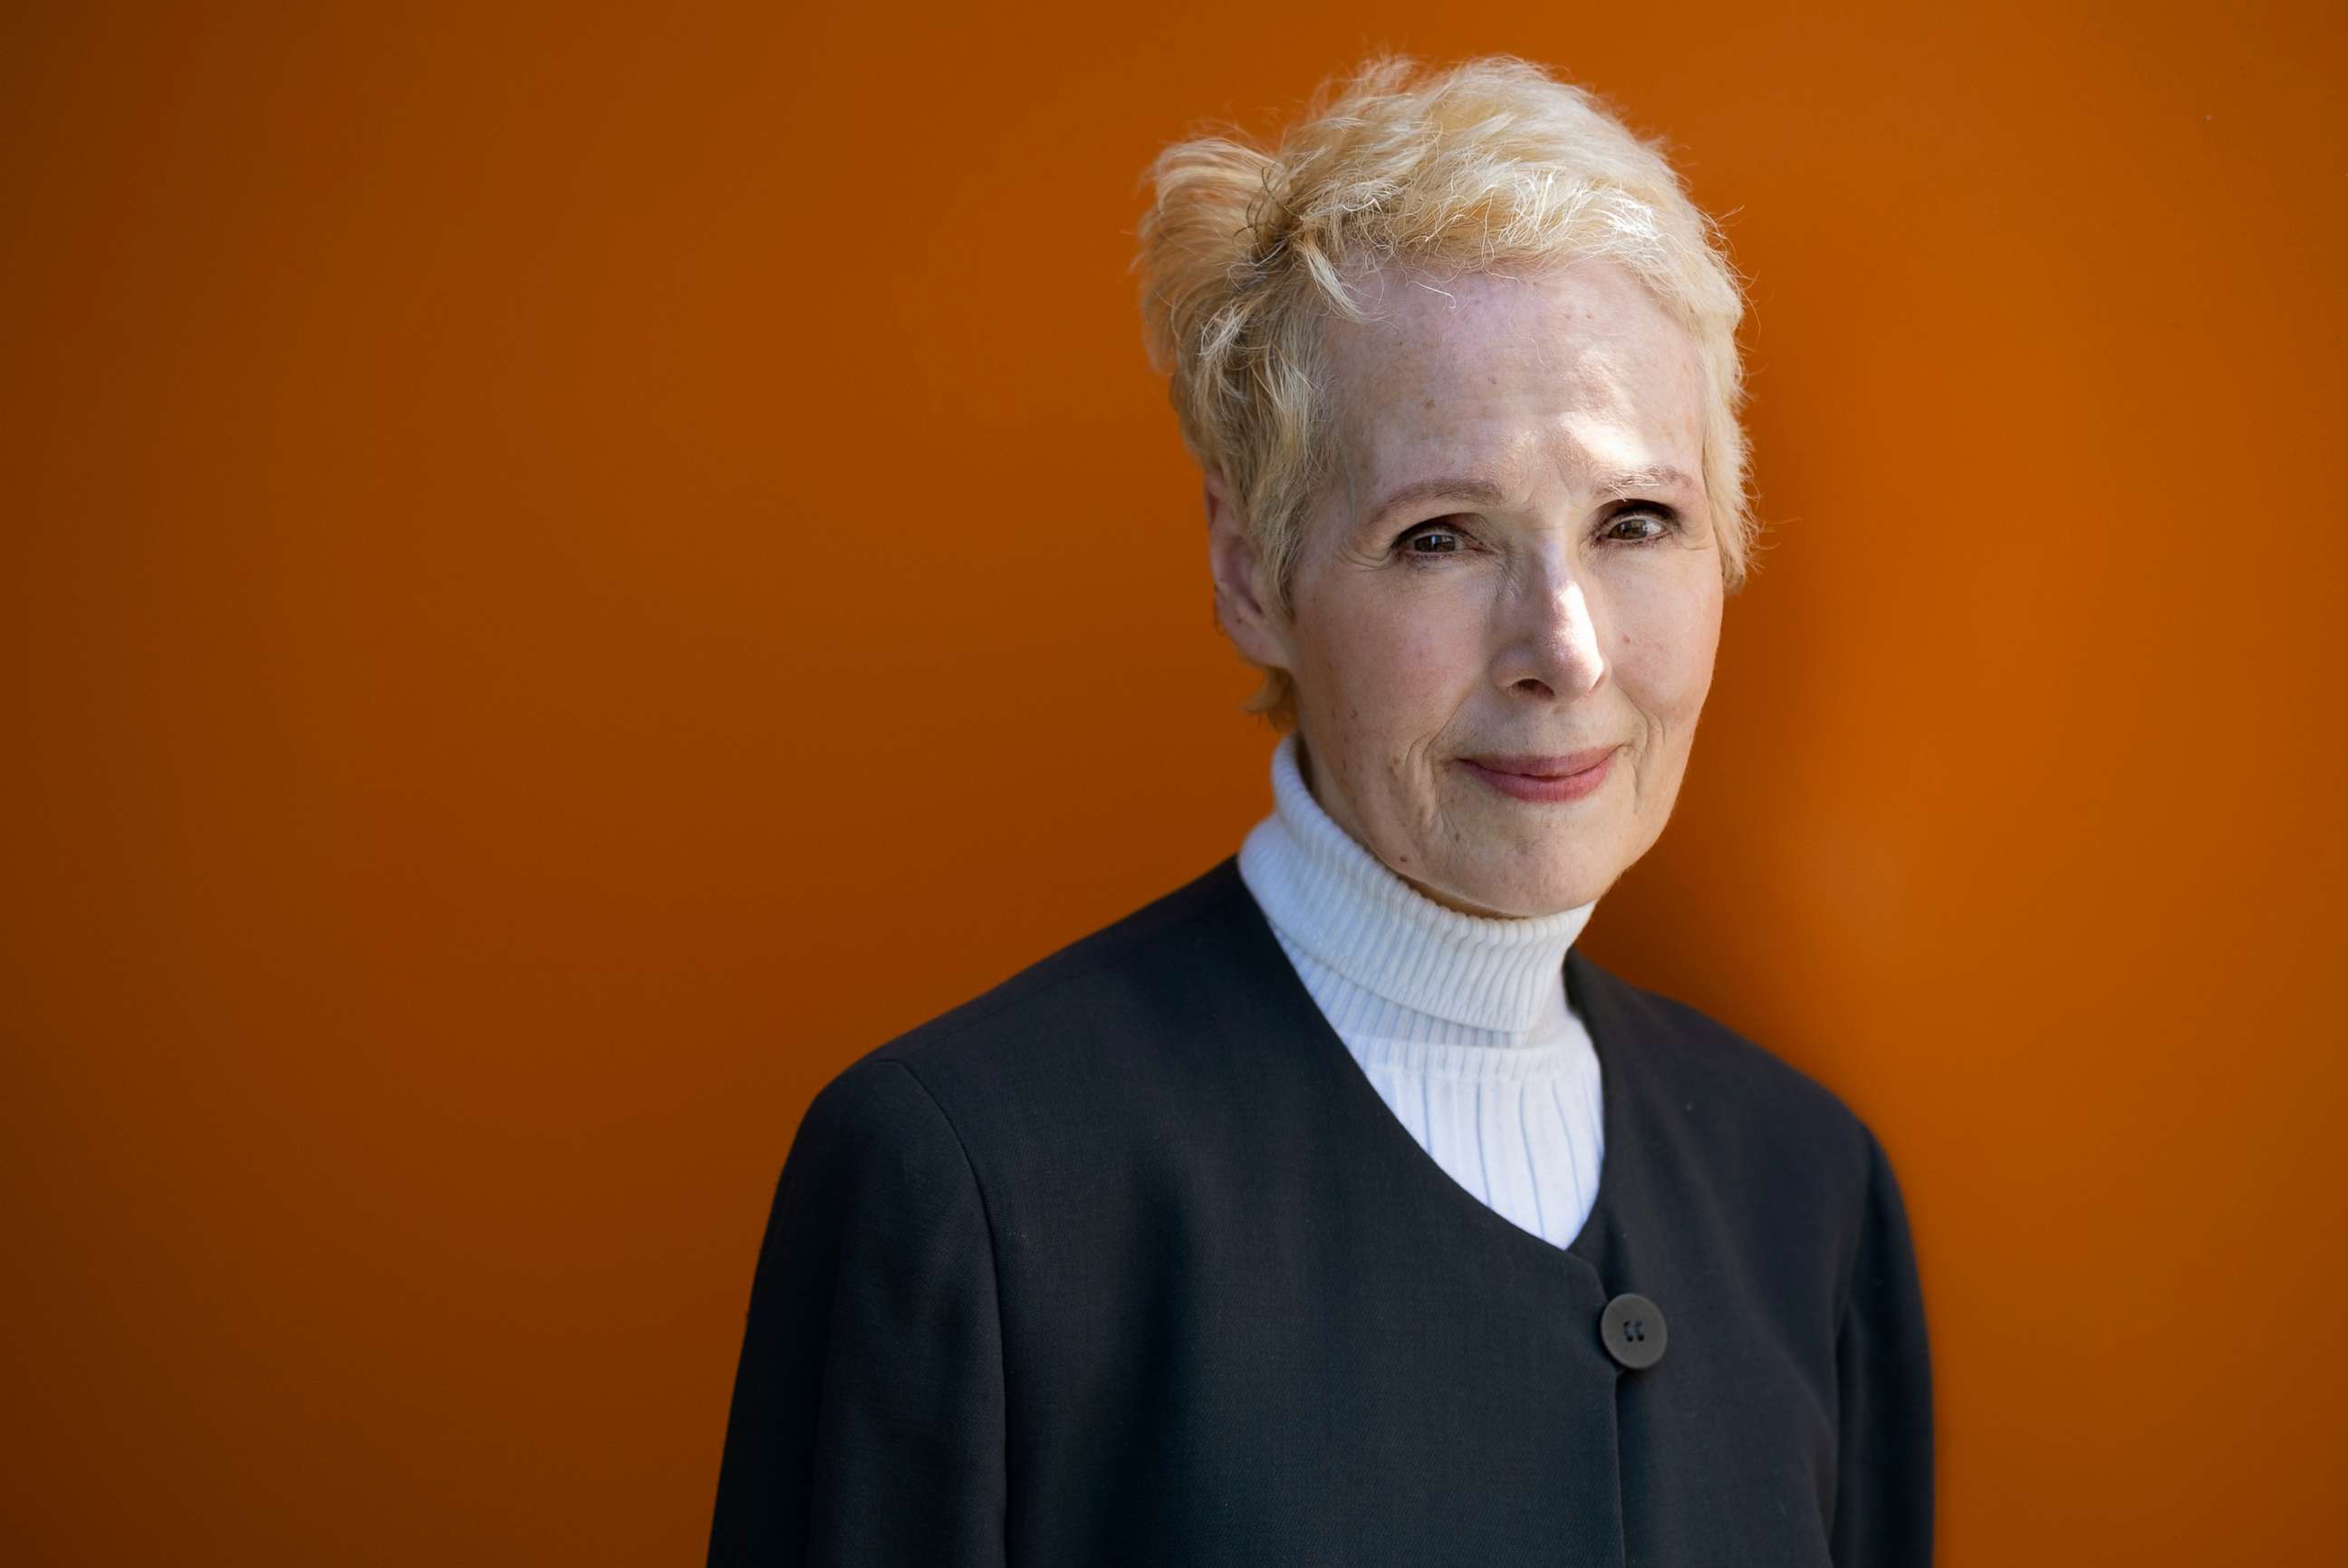 PHOTO: E. Jean Carroll poses for a photo in New York, June 23, 2019.